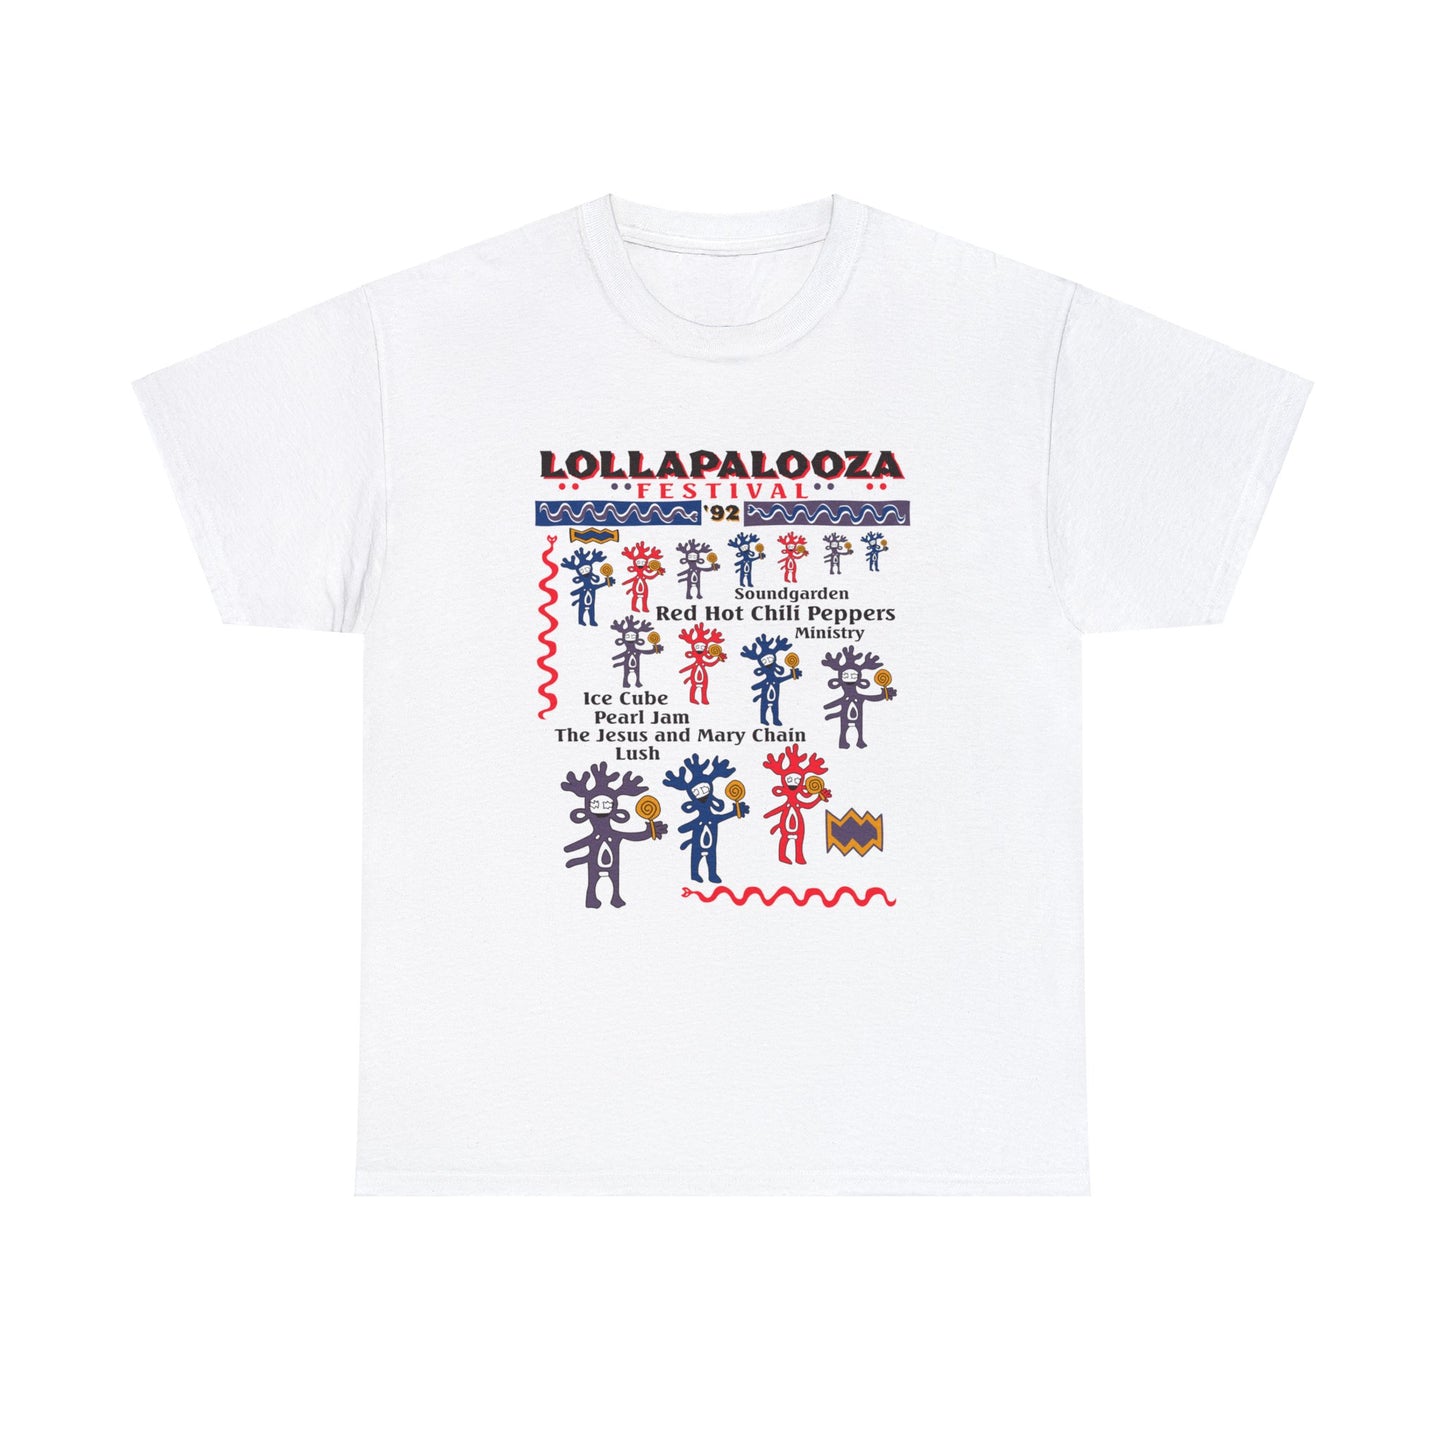 LOLLAPALOOZA Red Hot Chili Peppers Ministry 1992 T-shirt for Sale